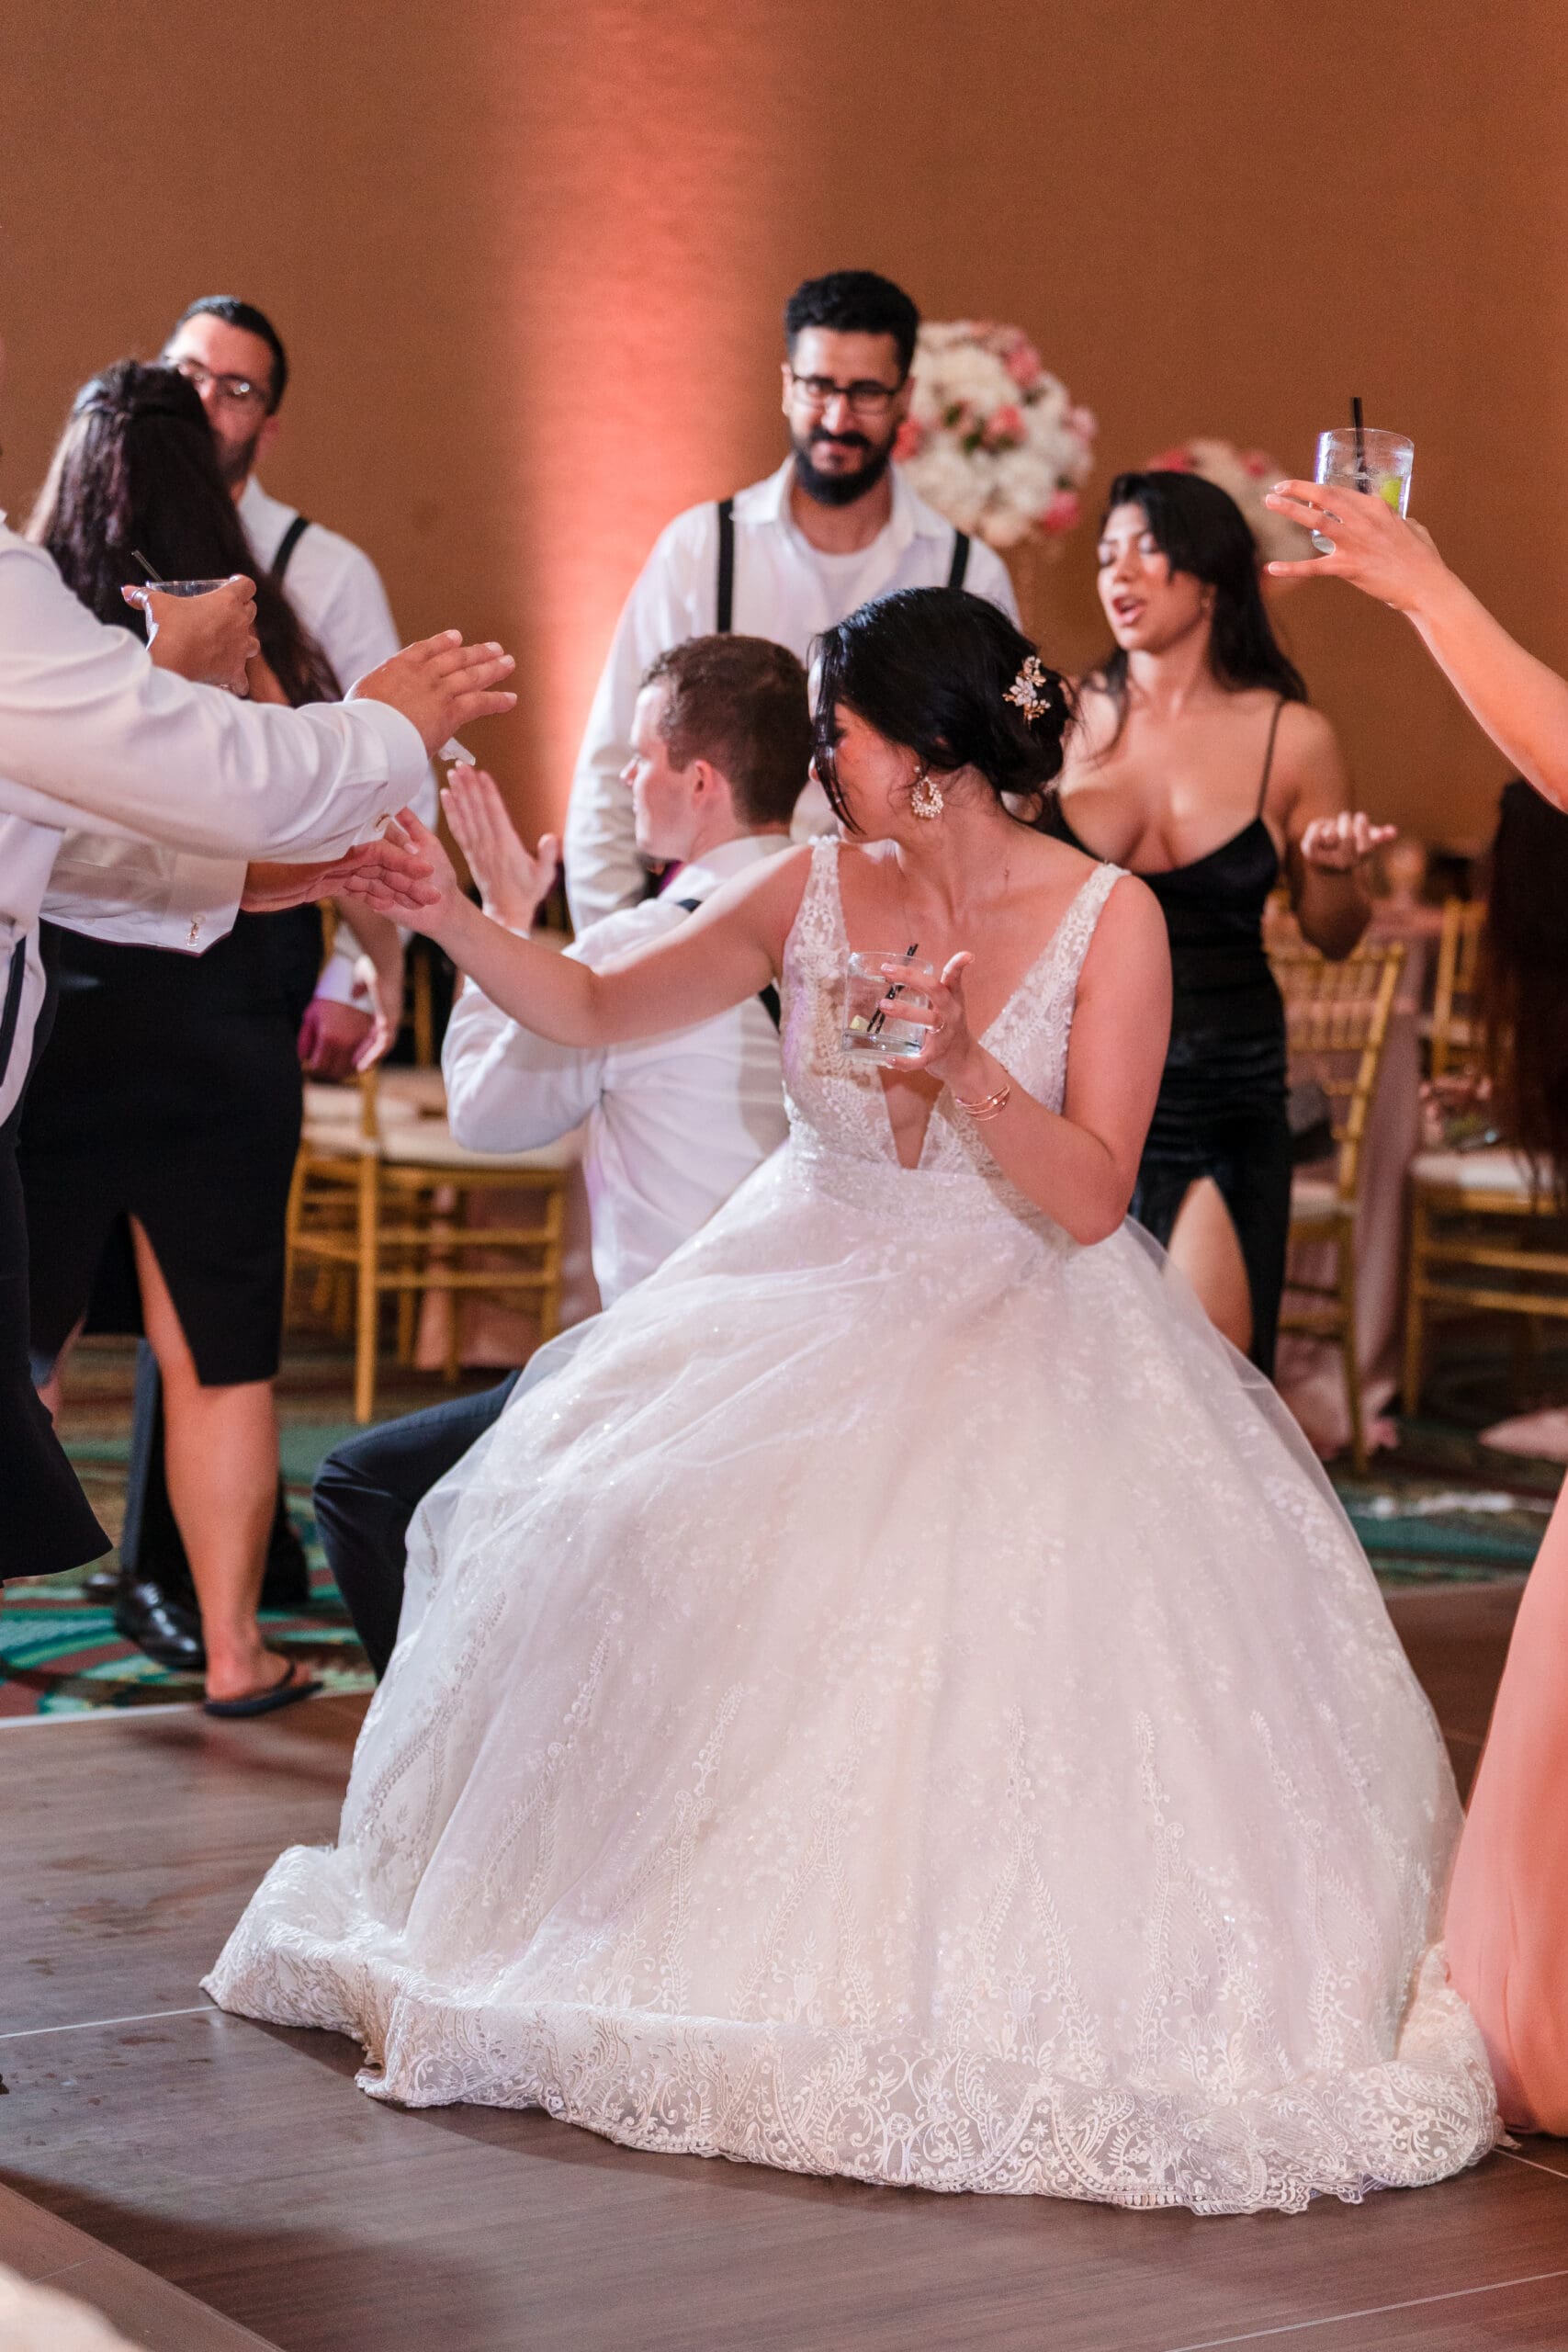 Jessica and everyone dancing at the reception, captured in a tall shot at the Orlando Royale Caribe reception center by Jerzy Nieves Photography.